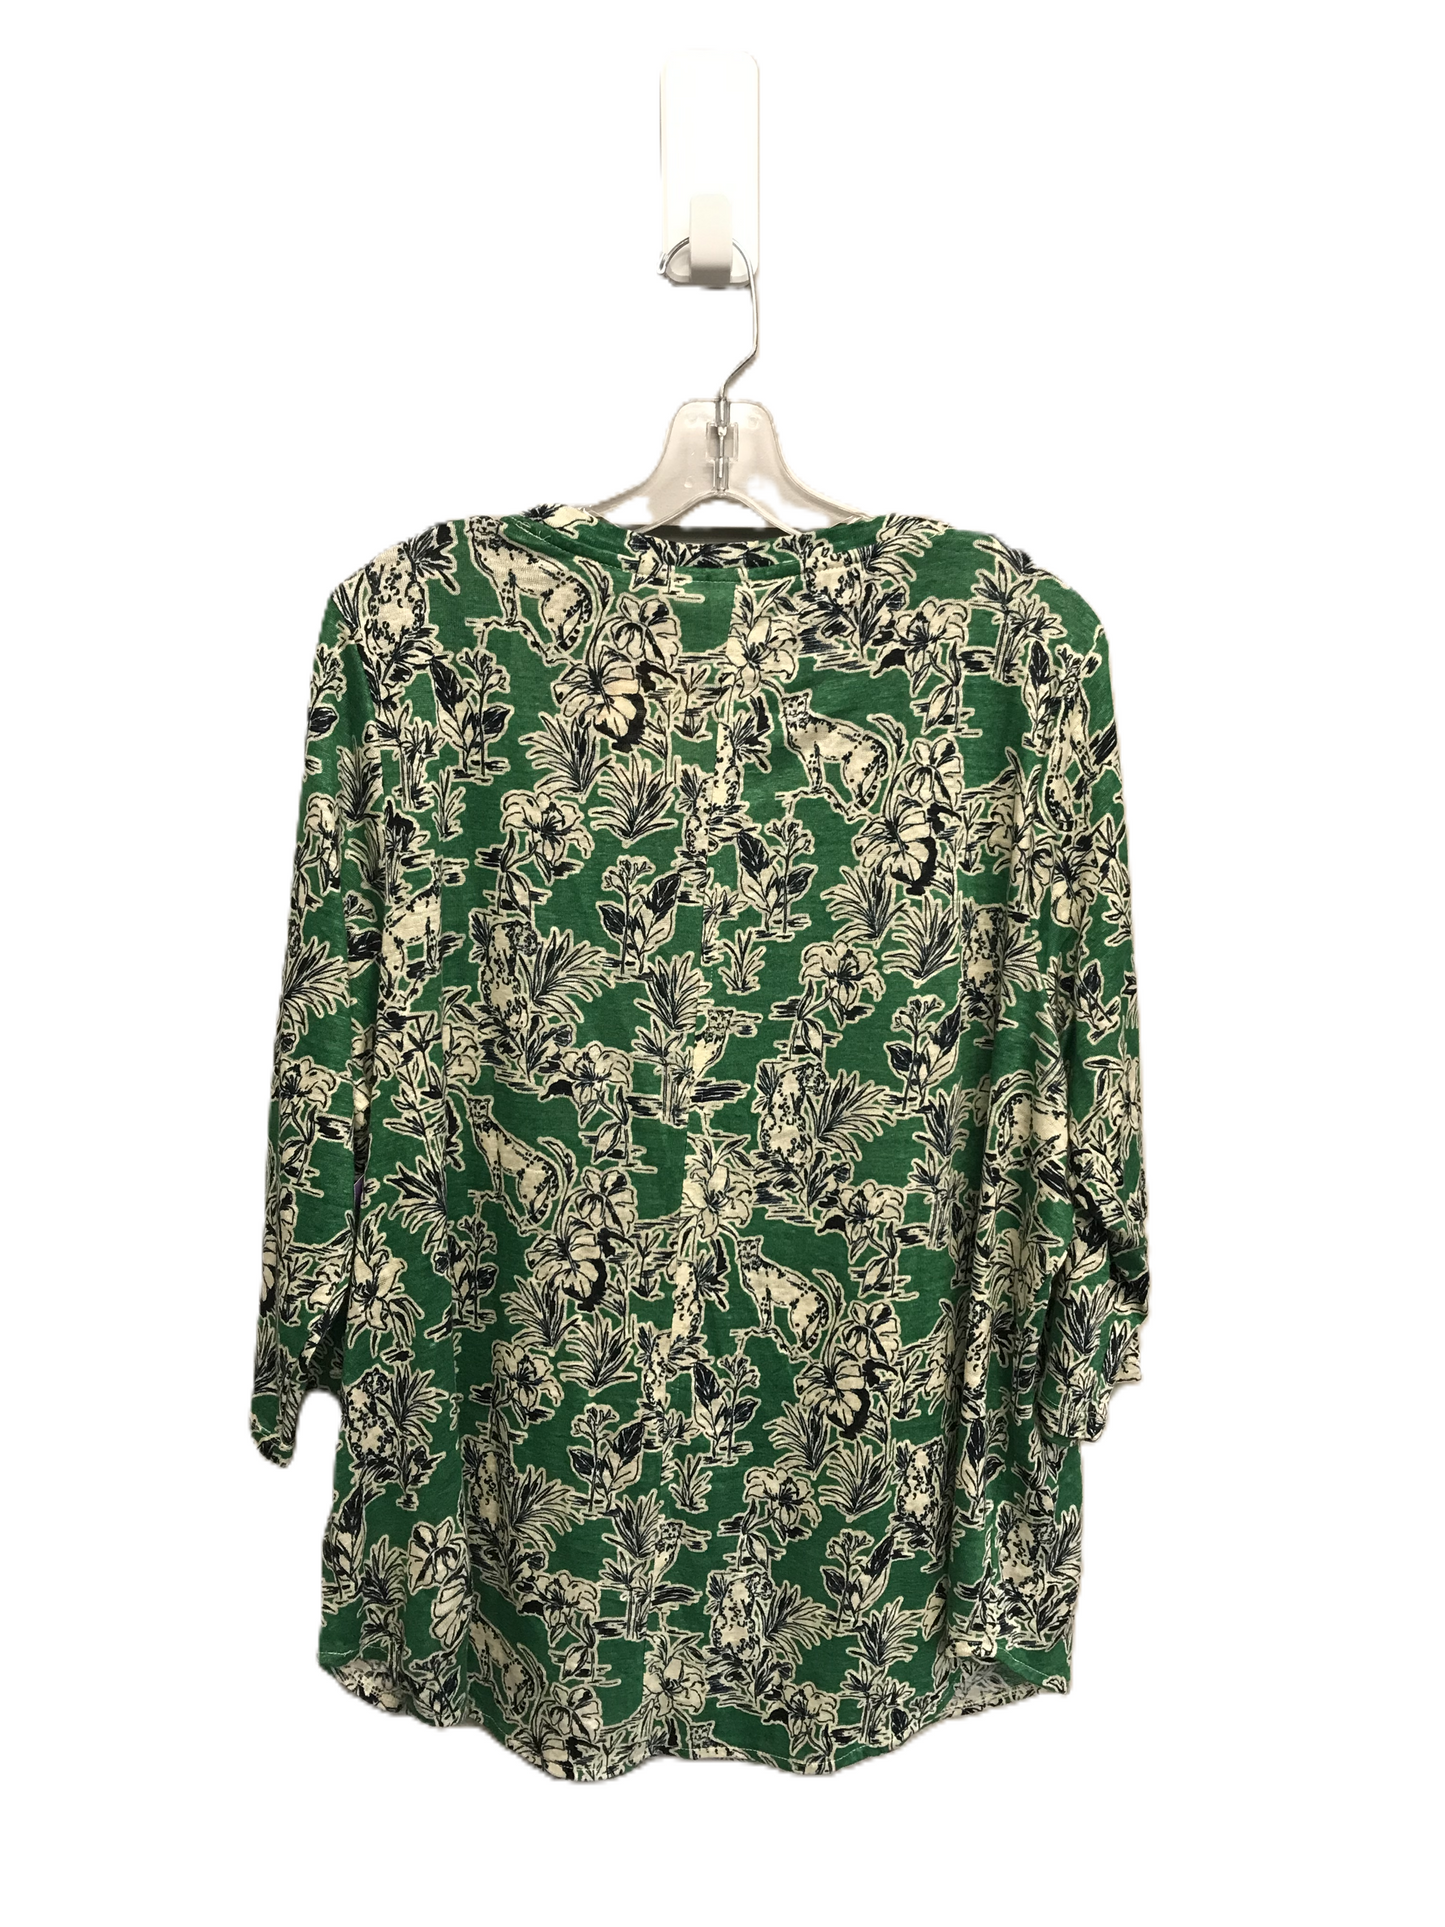 Floral Print Top Long Sleeve By C And C, Size: 1x